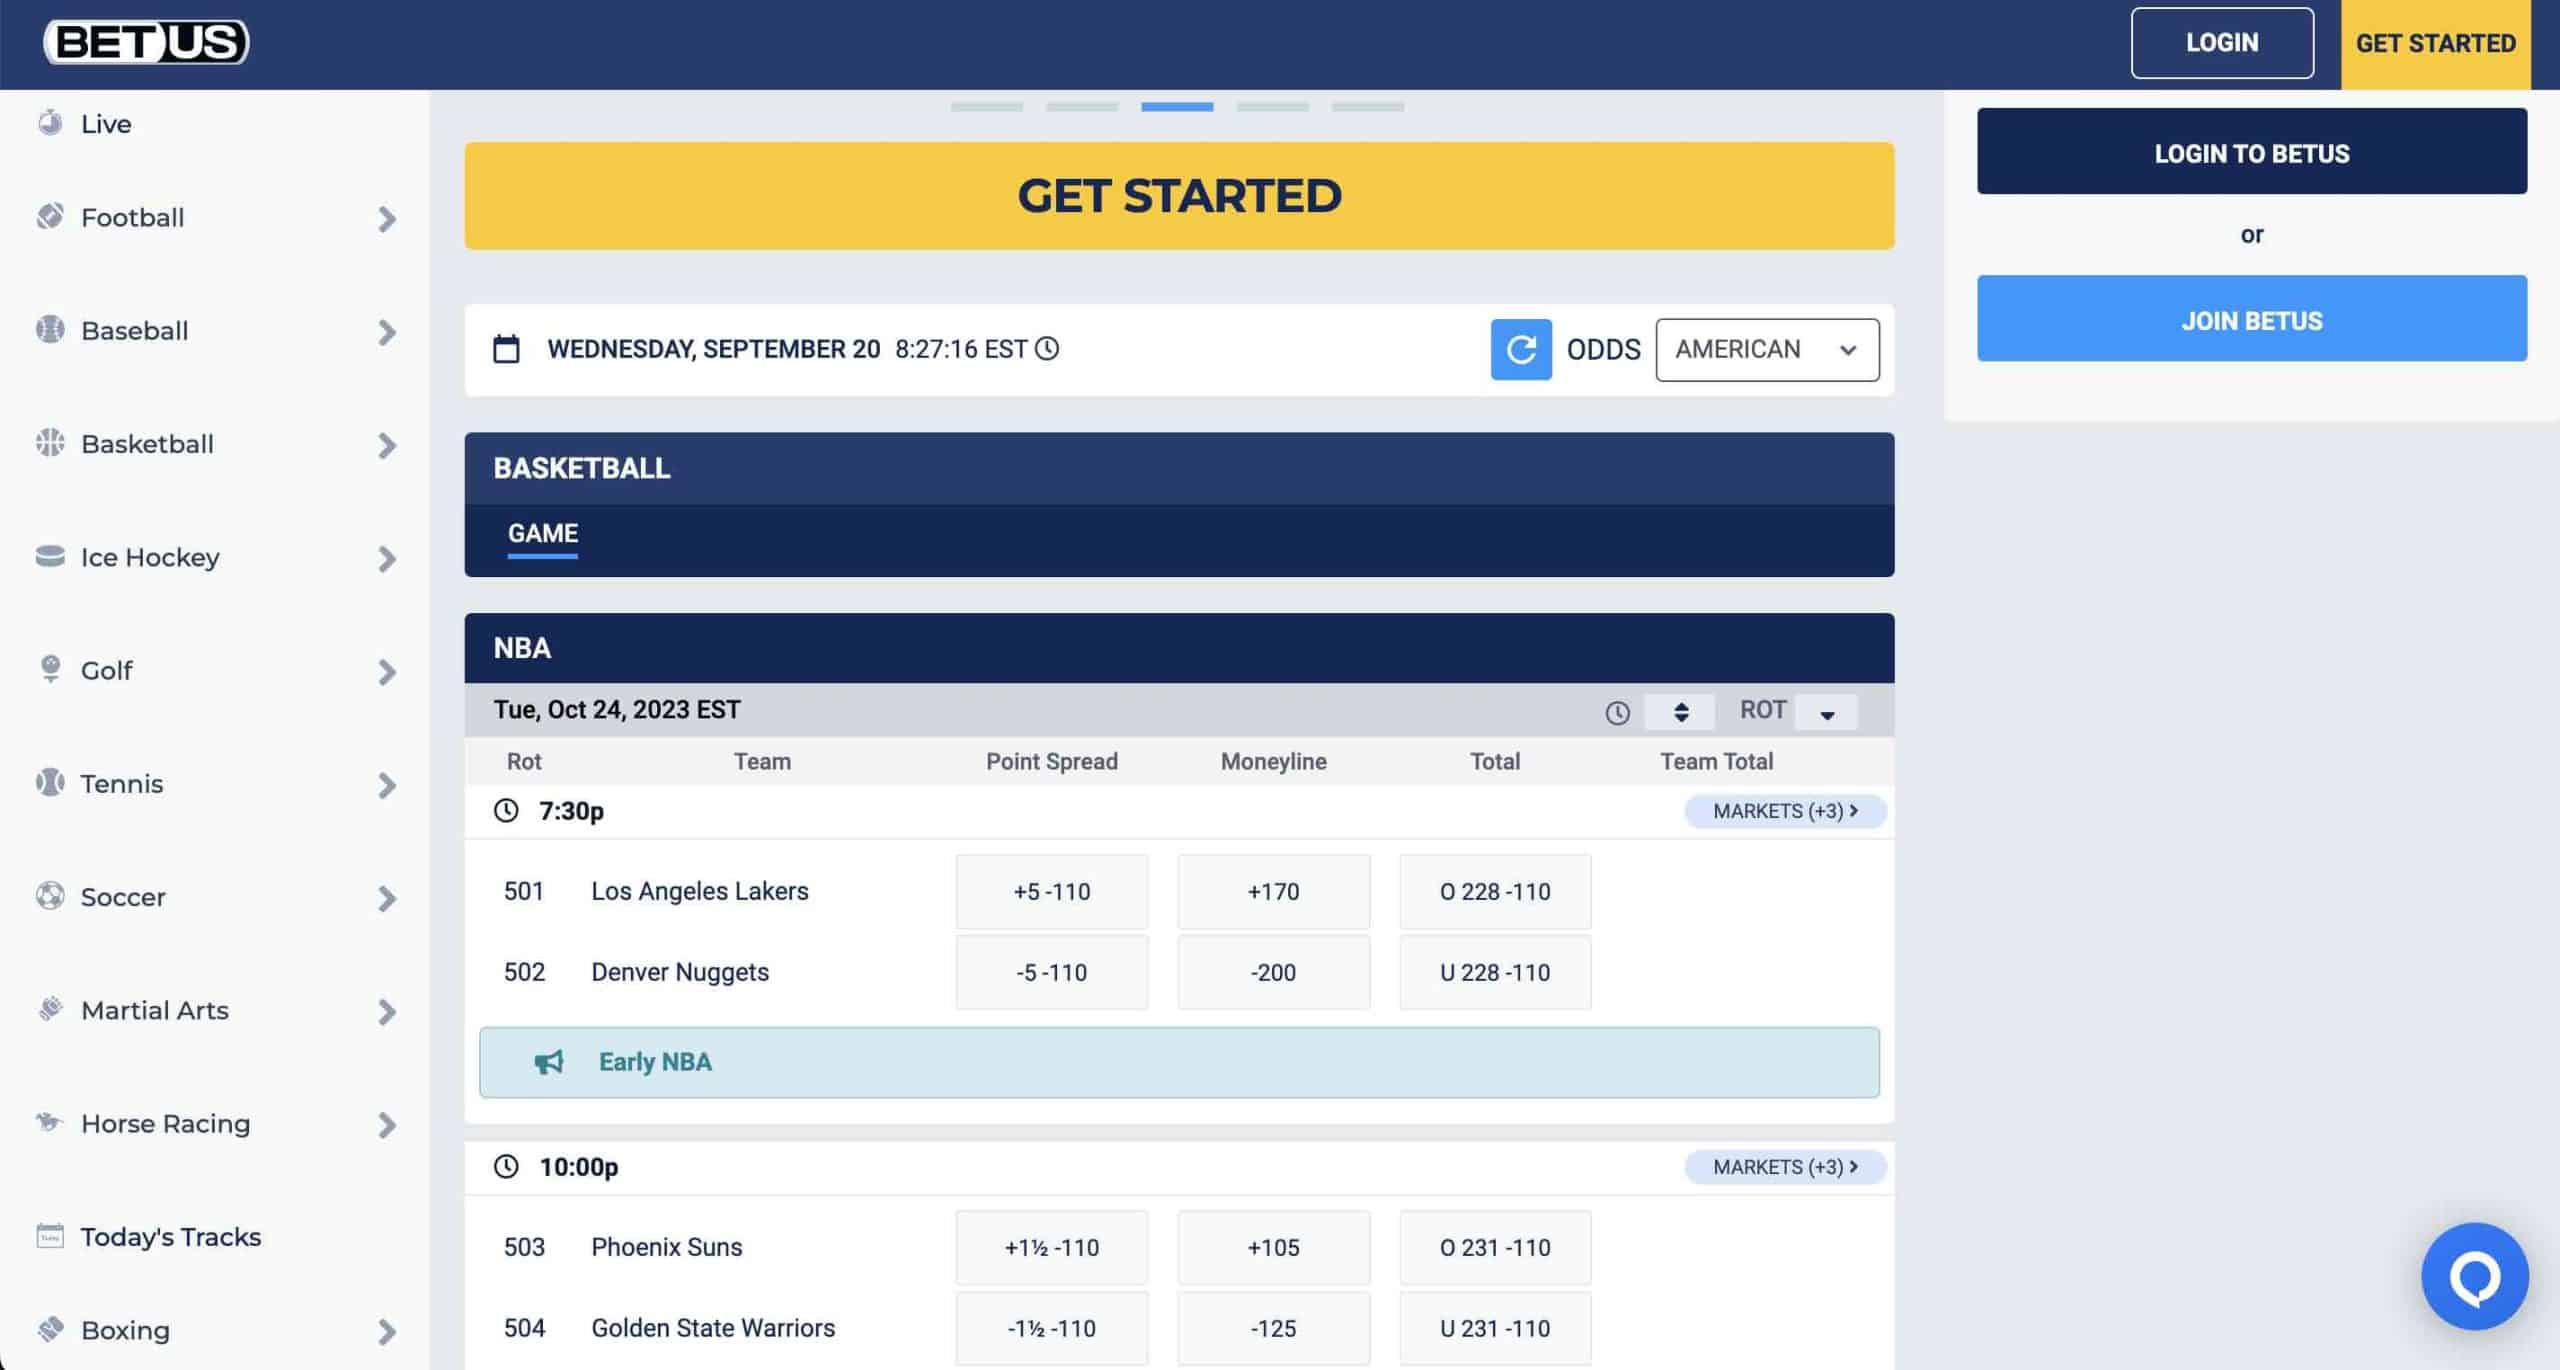 The best Washington sports betting sites - A screenshot of some BetUS basketball odds